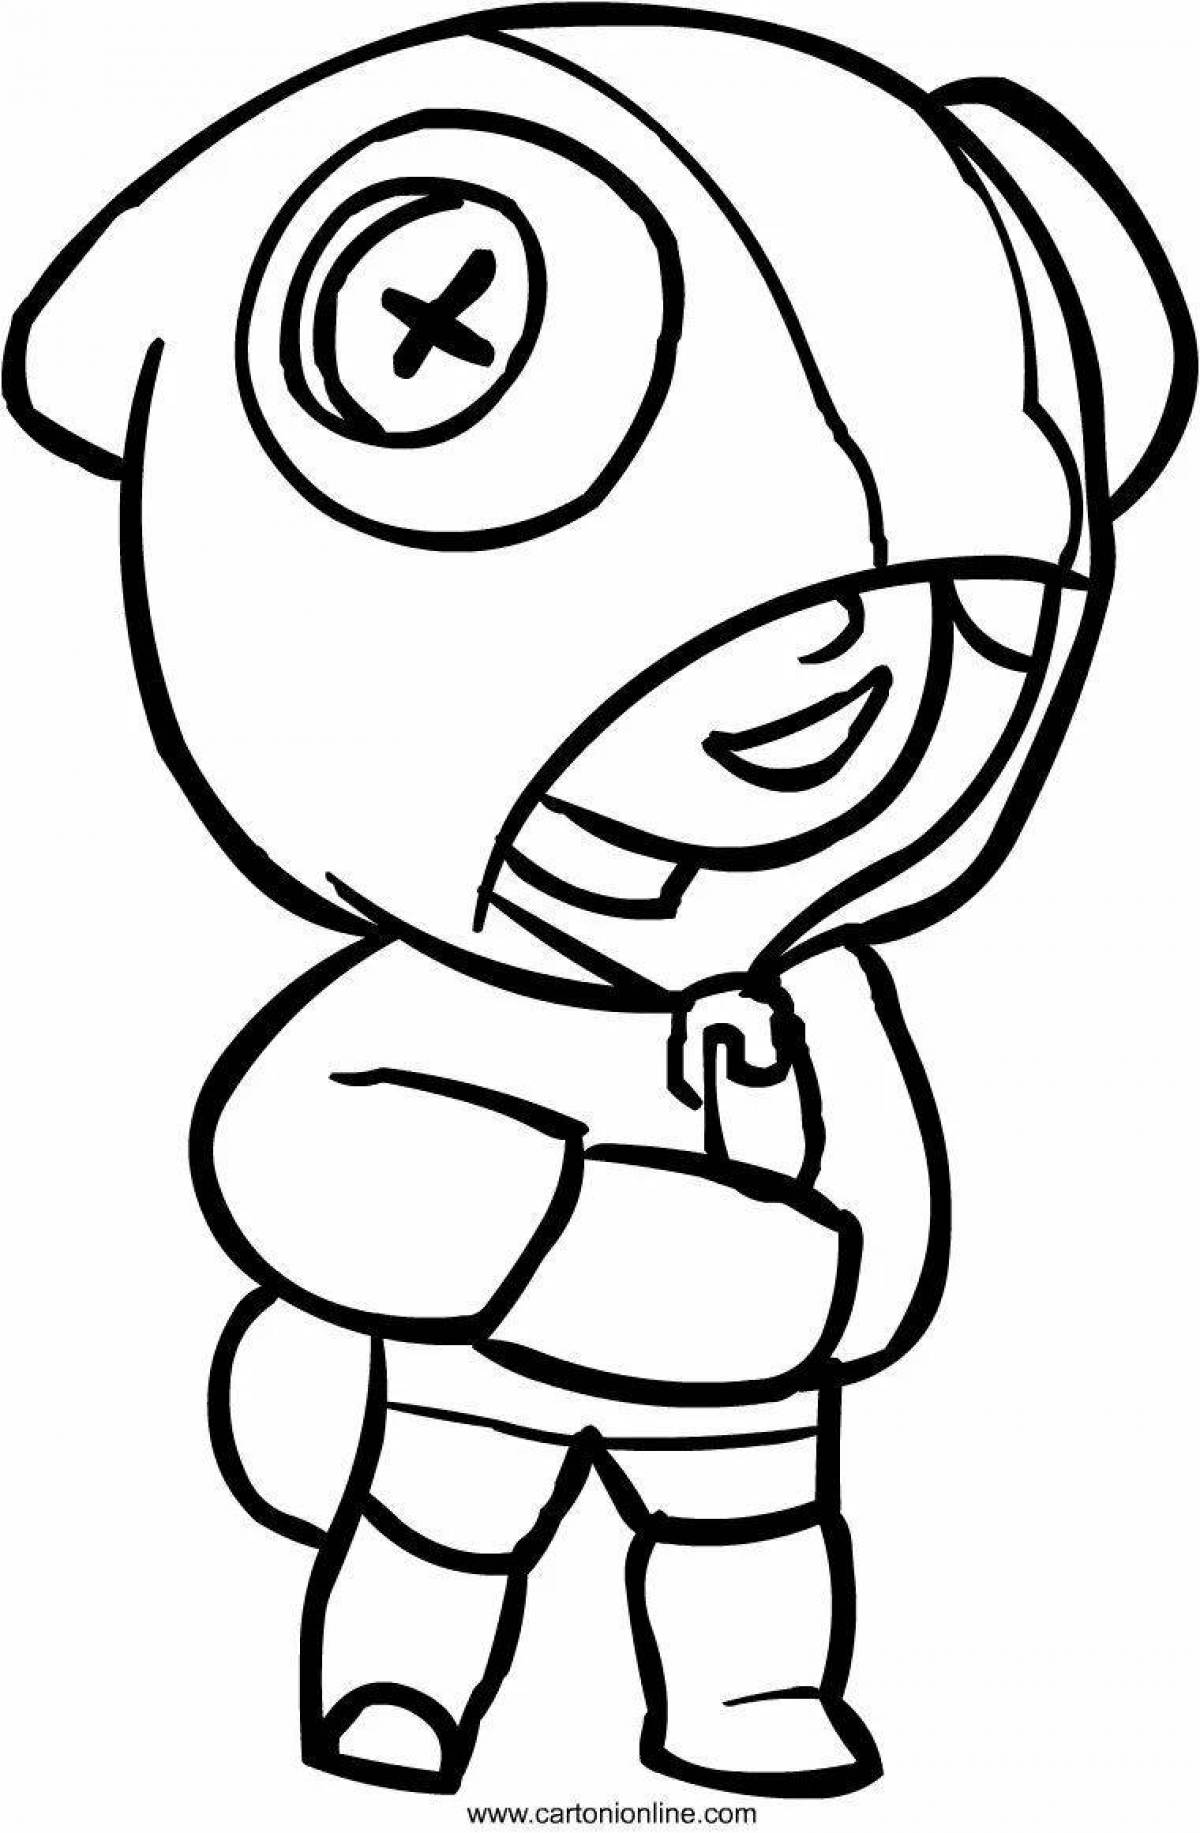 Coloring page spectacular brawler icons